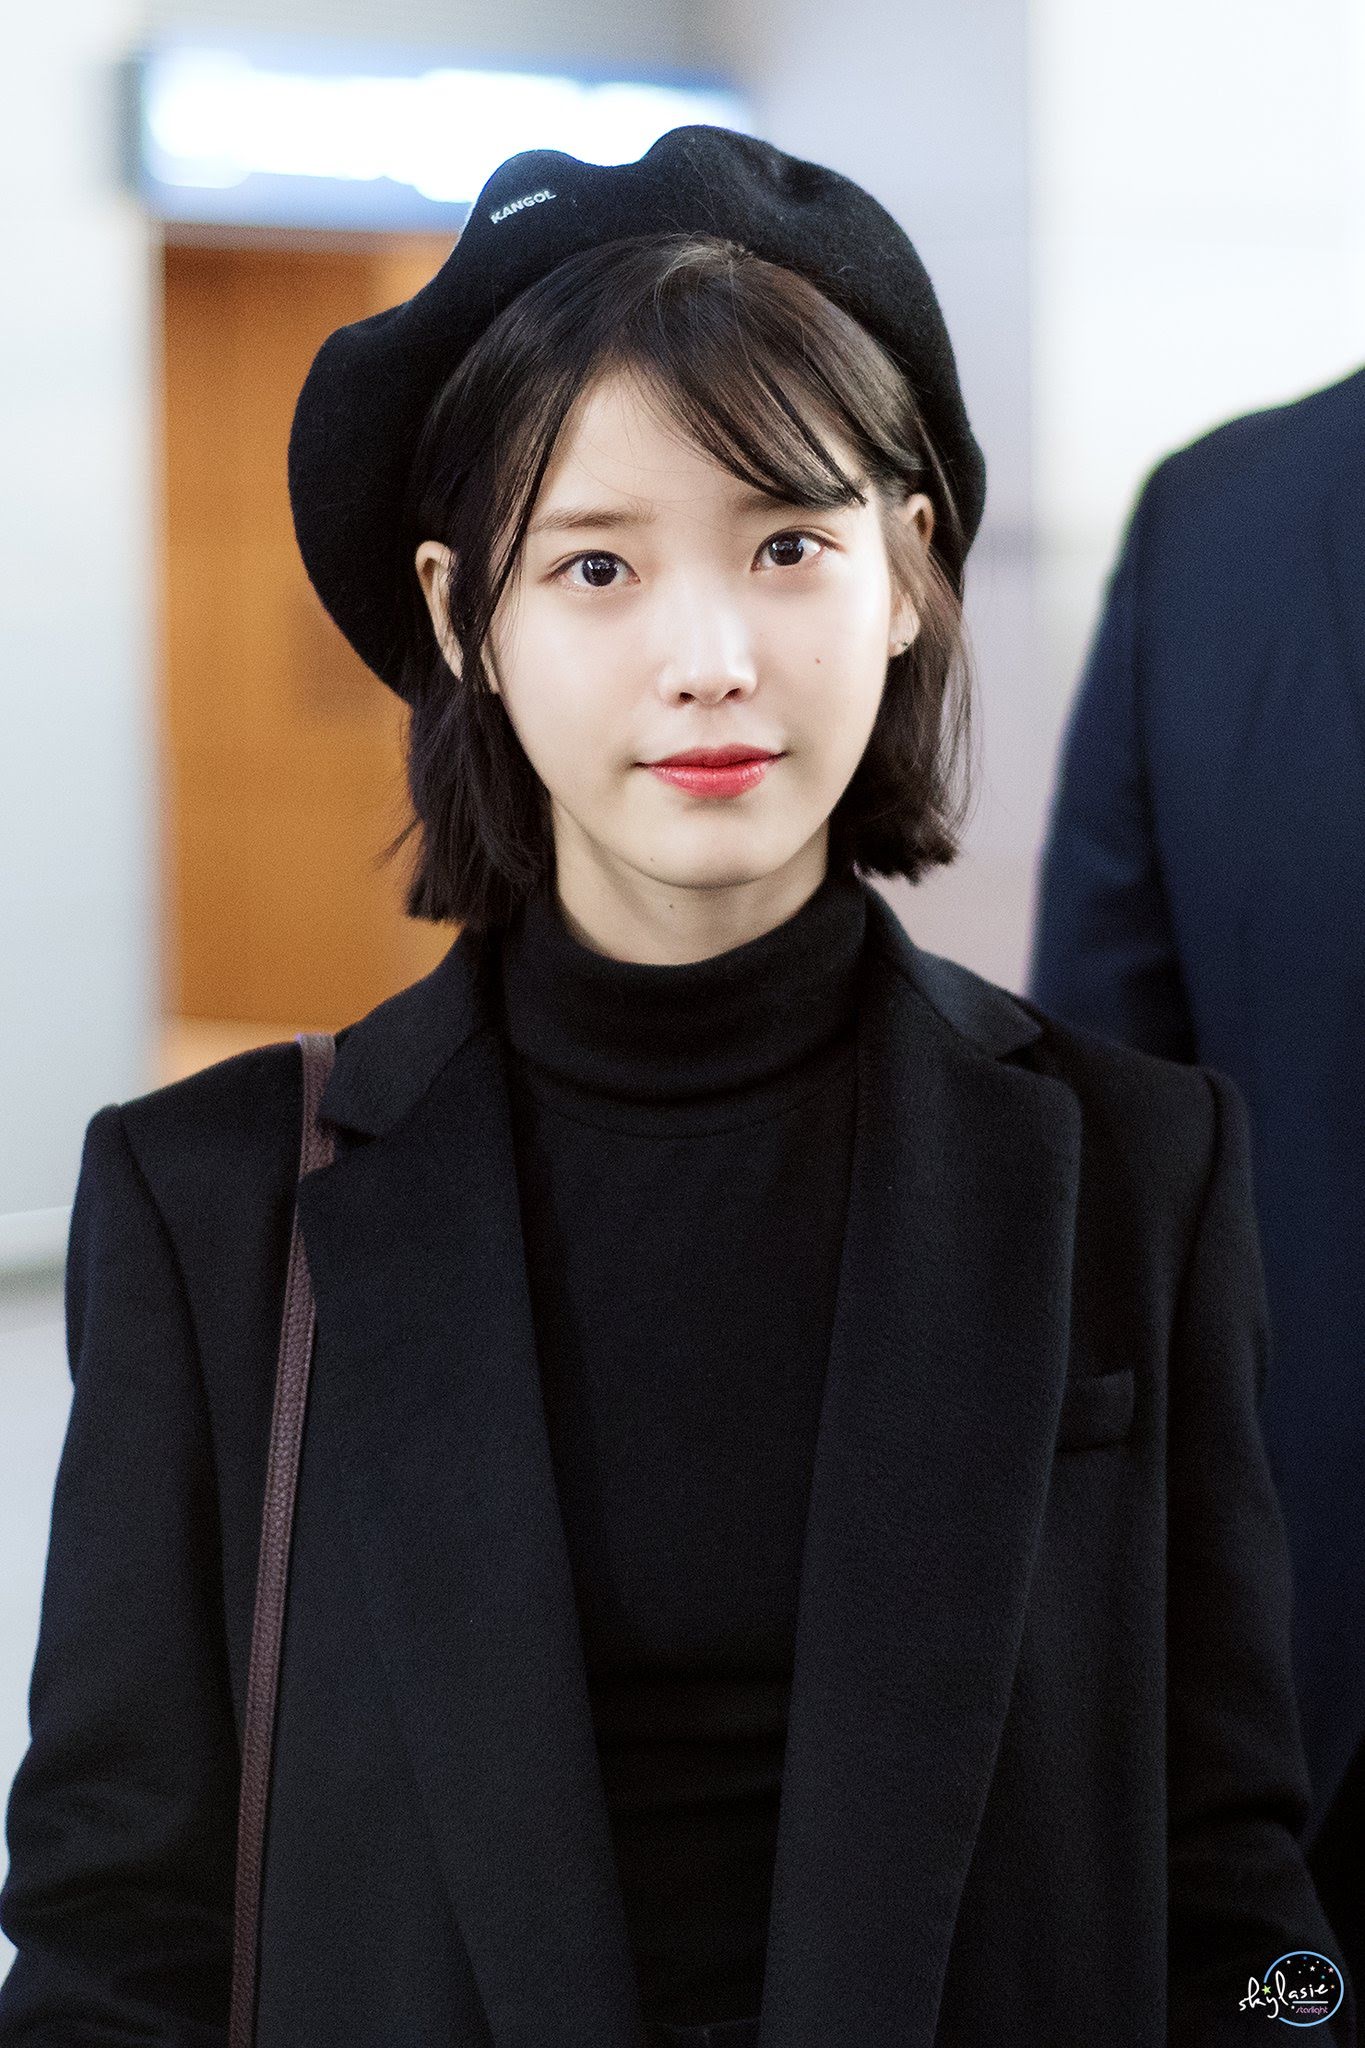 10-times-iu-impressed-with-her-chic-visuals-in-boss-af-suits.jpg